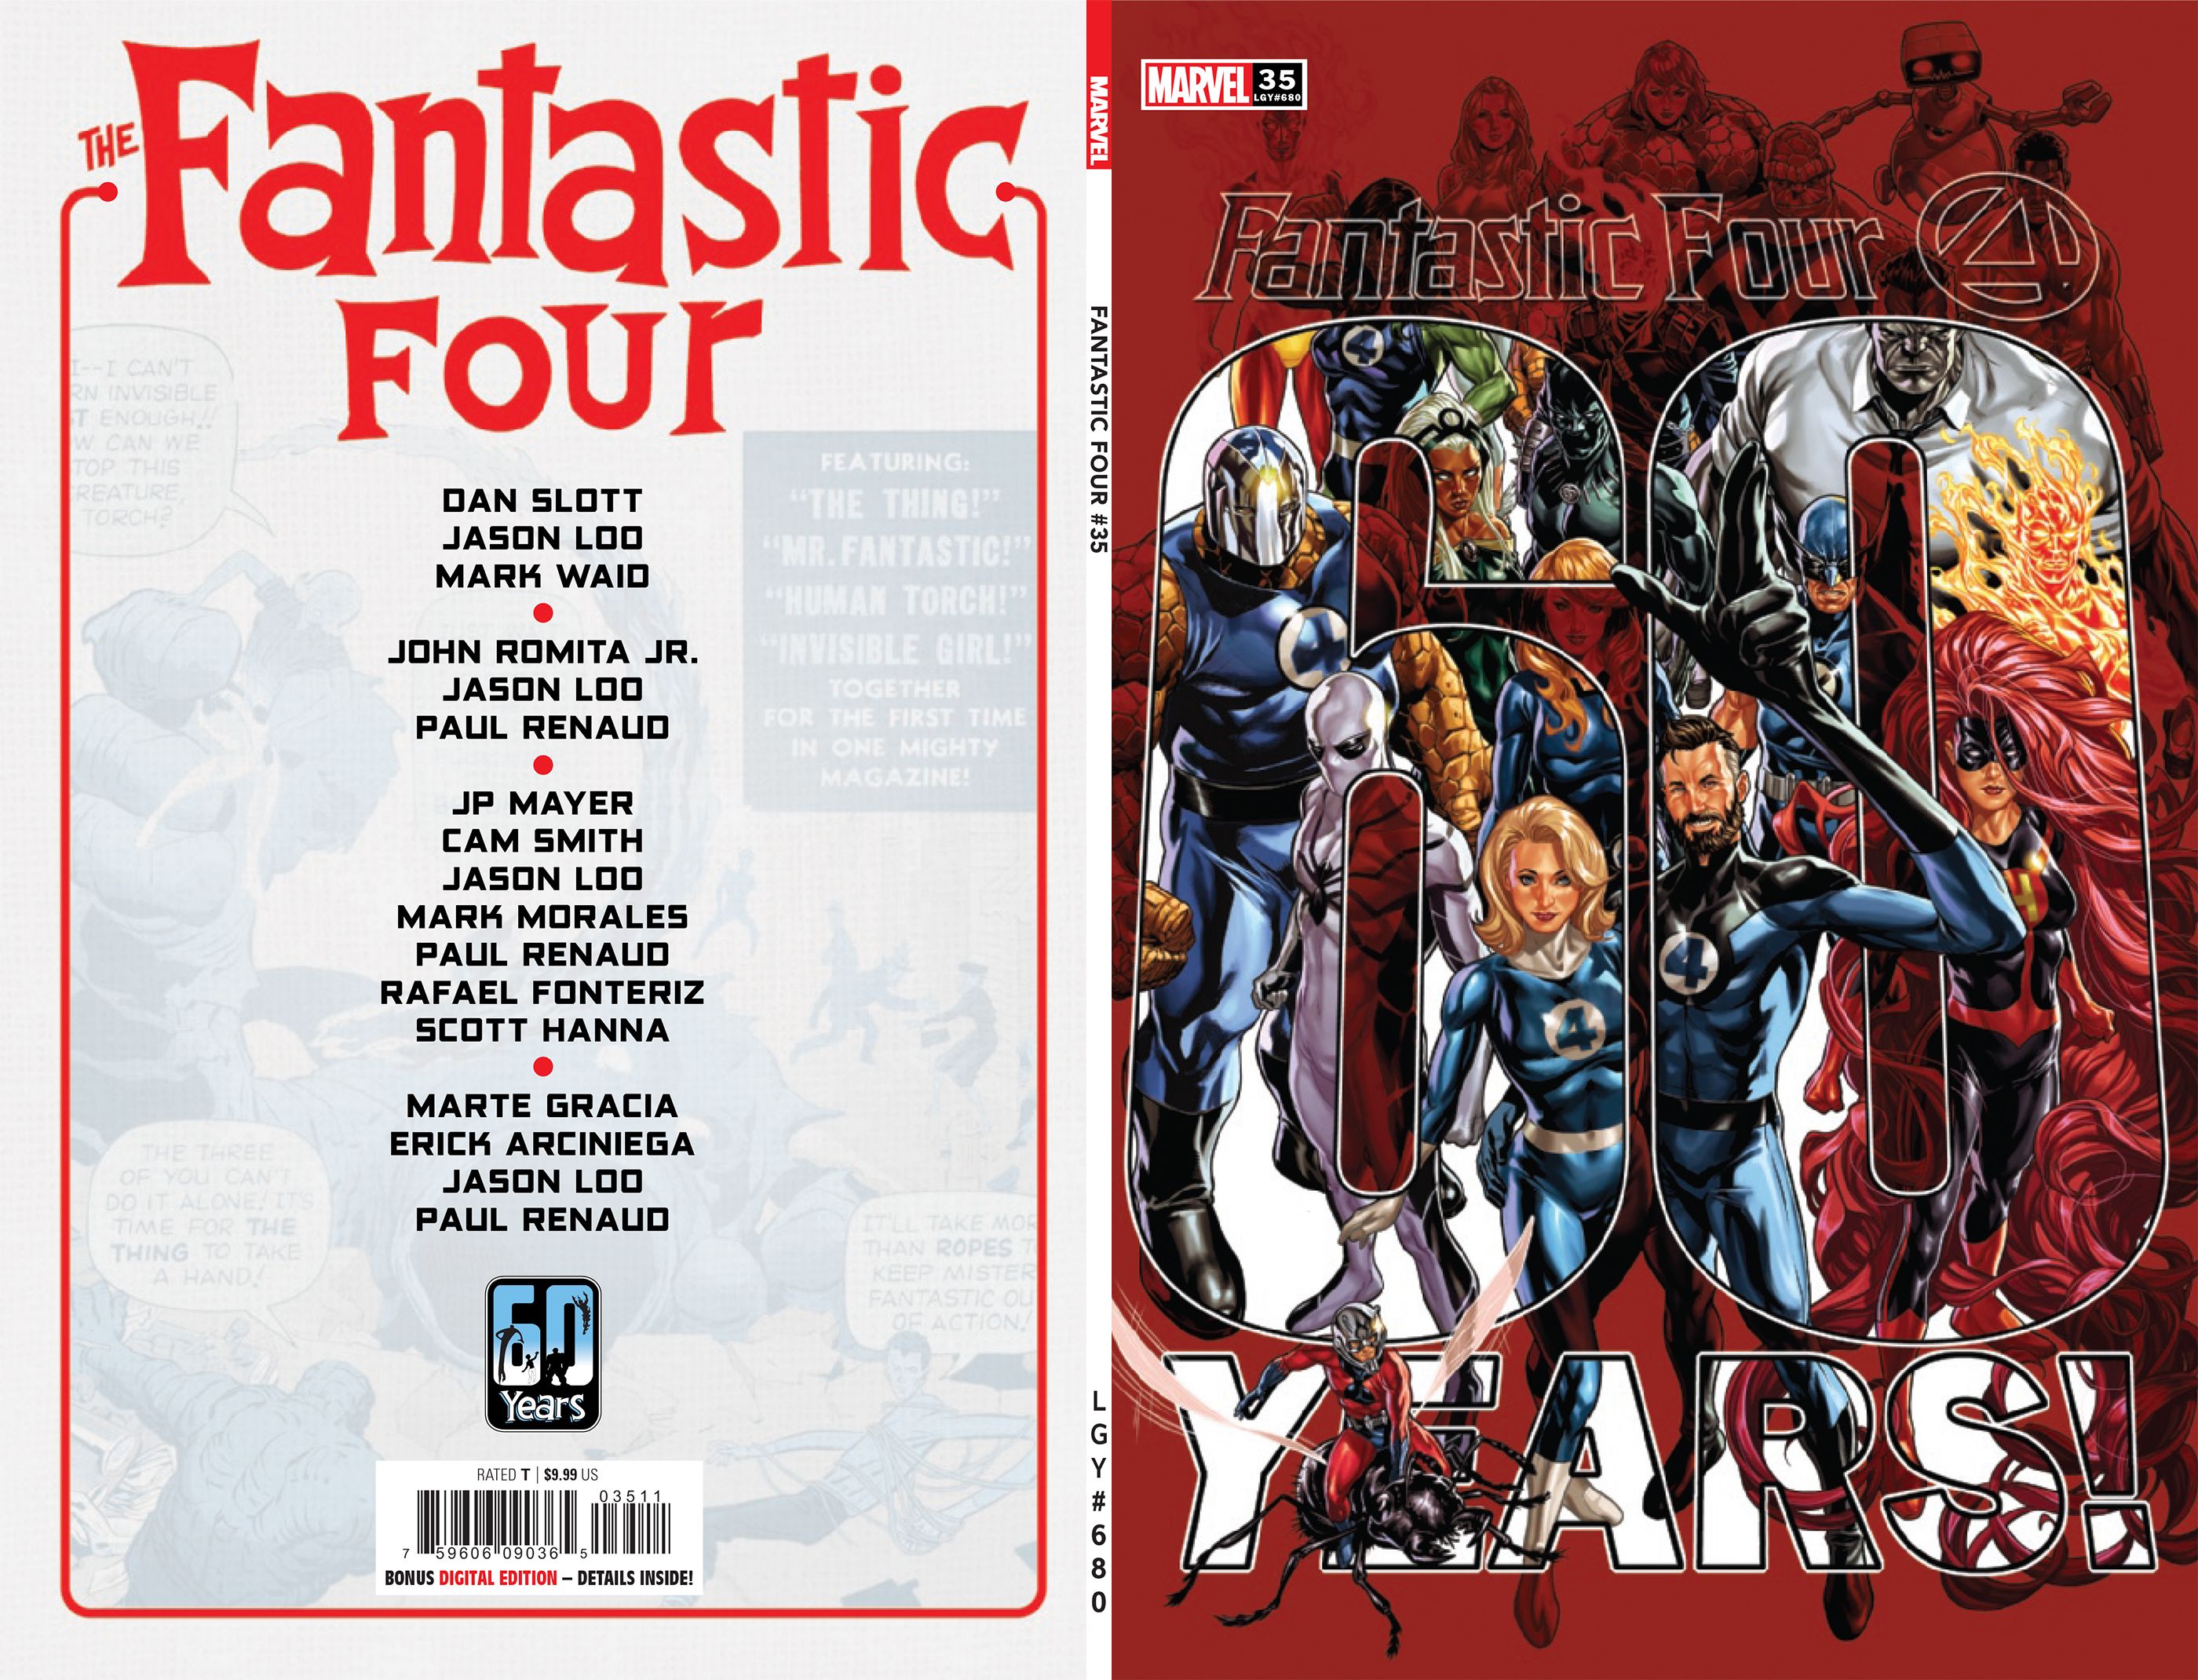 The main cover to the 60th anniversary issue of the Fantastic Four.